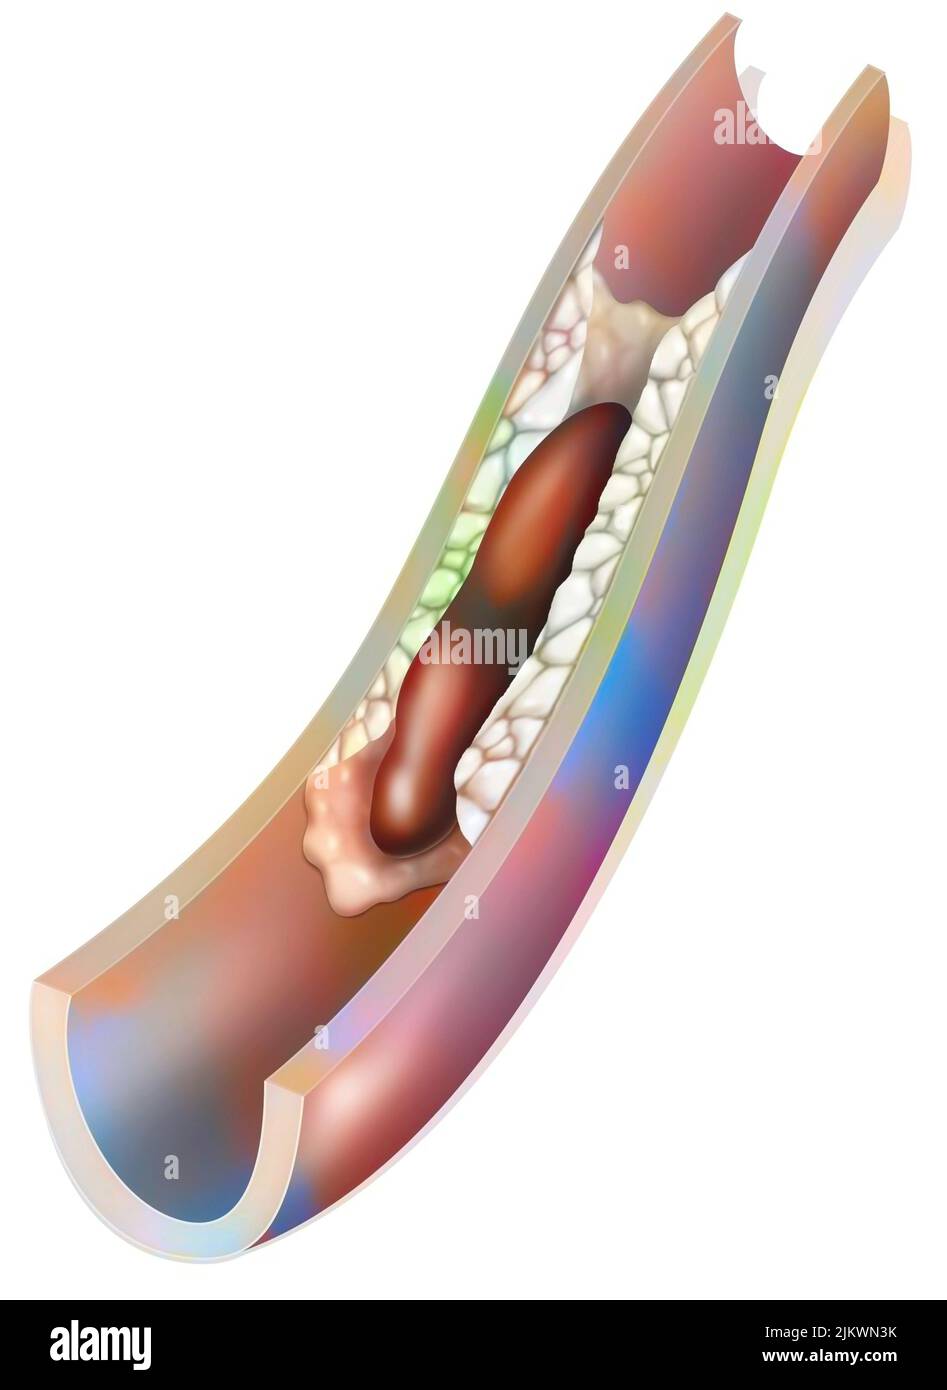 Artery with atheromatous plaque and a thrombus (blood clot). Stock Photo